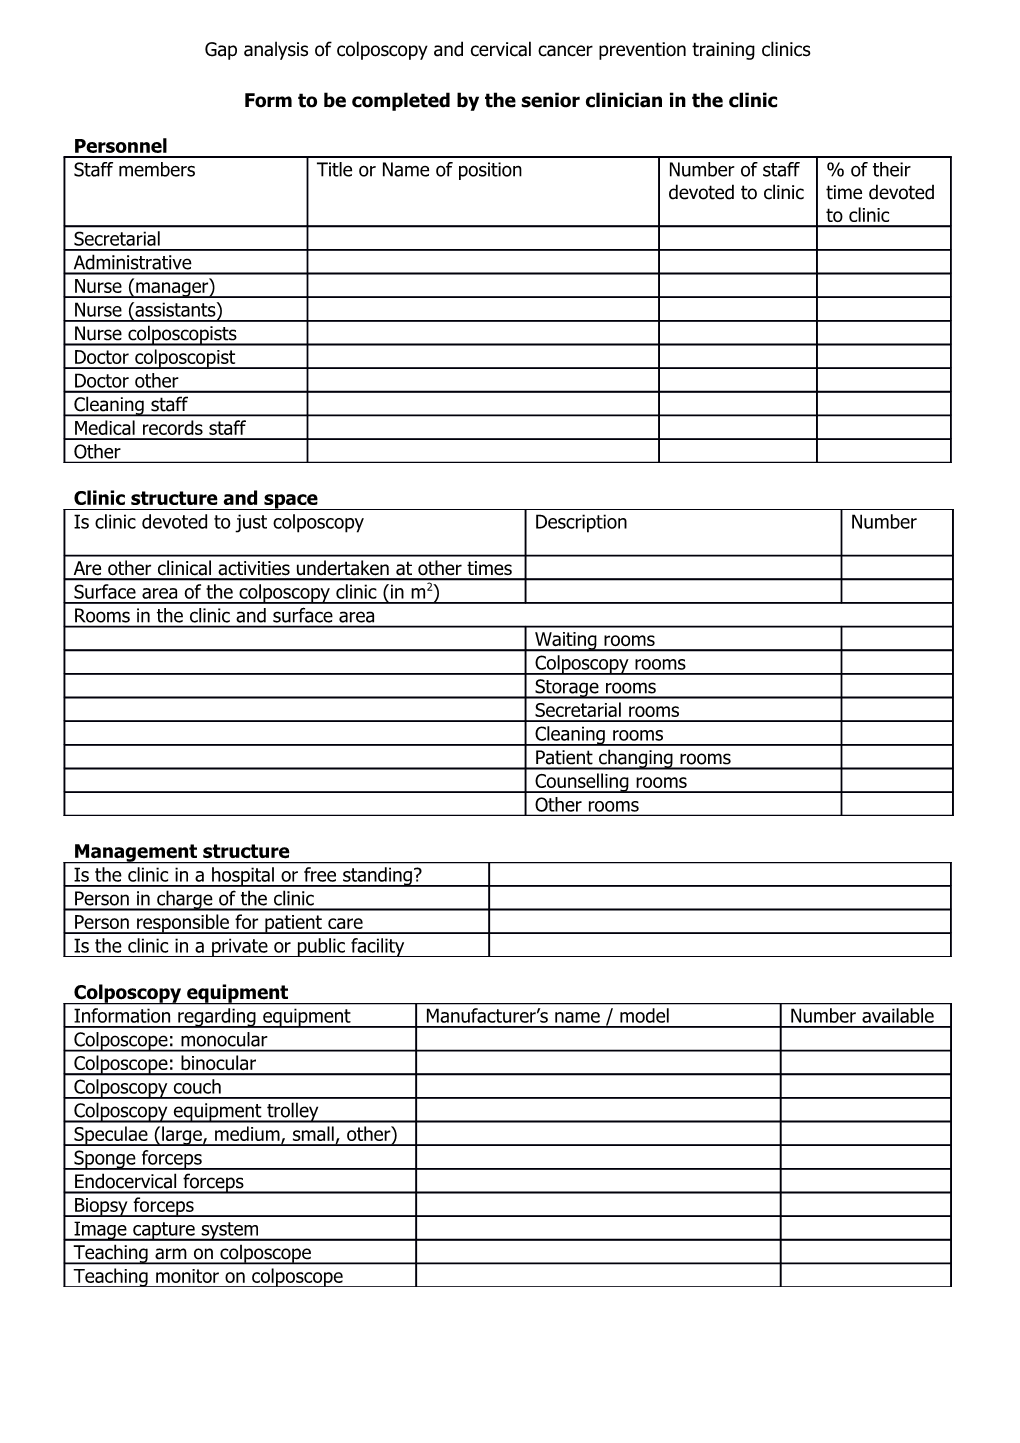 Form to Be Completed by the Senior Clinician in the Clinic